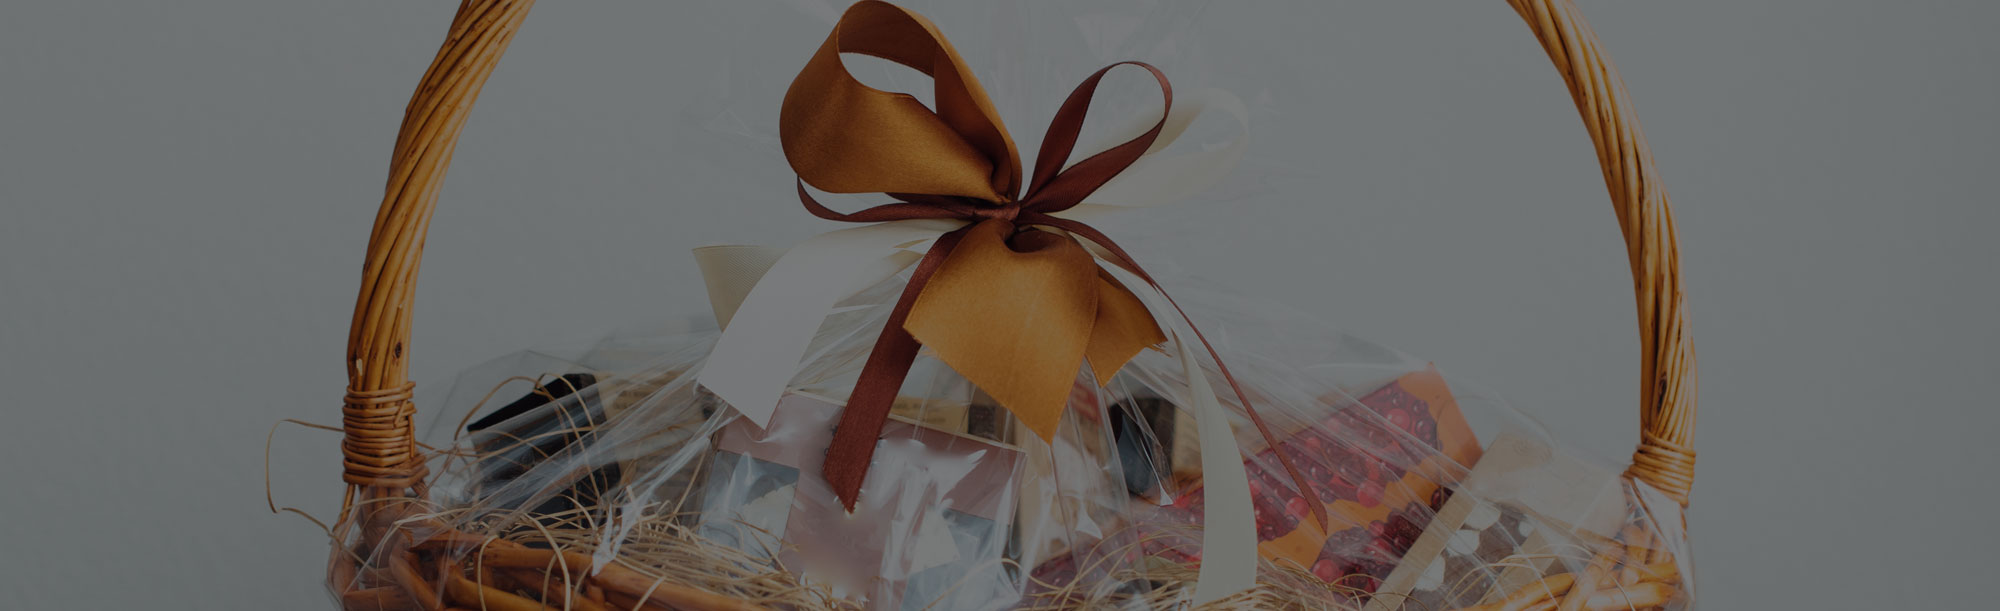 Coffee Lover Gift Basket – Lend A Hand Up